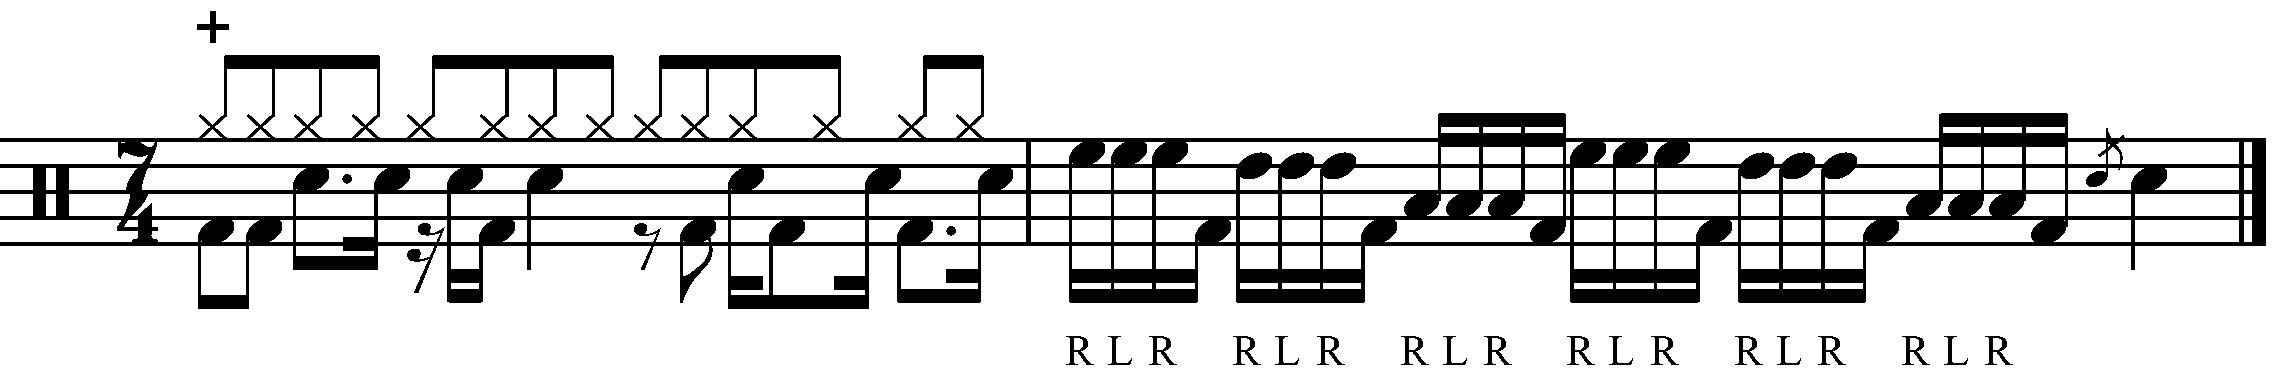 A two bar phrase containing a fill built using the RLRF shape